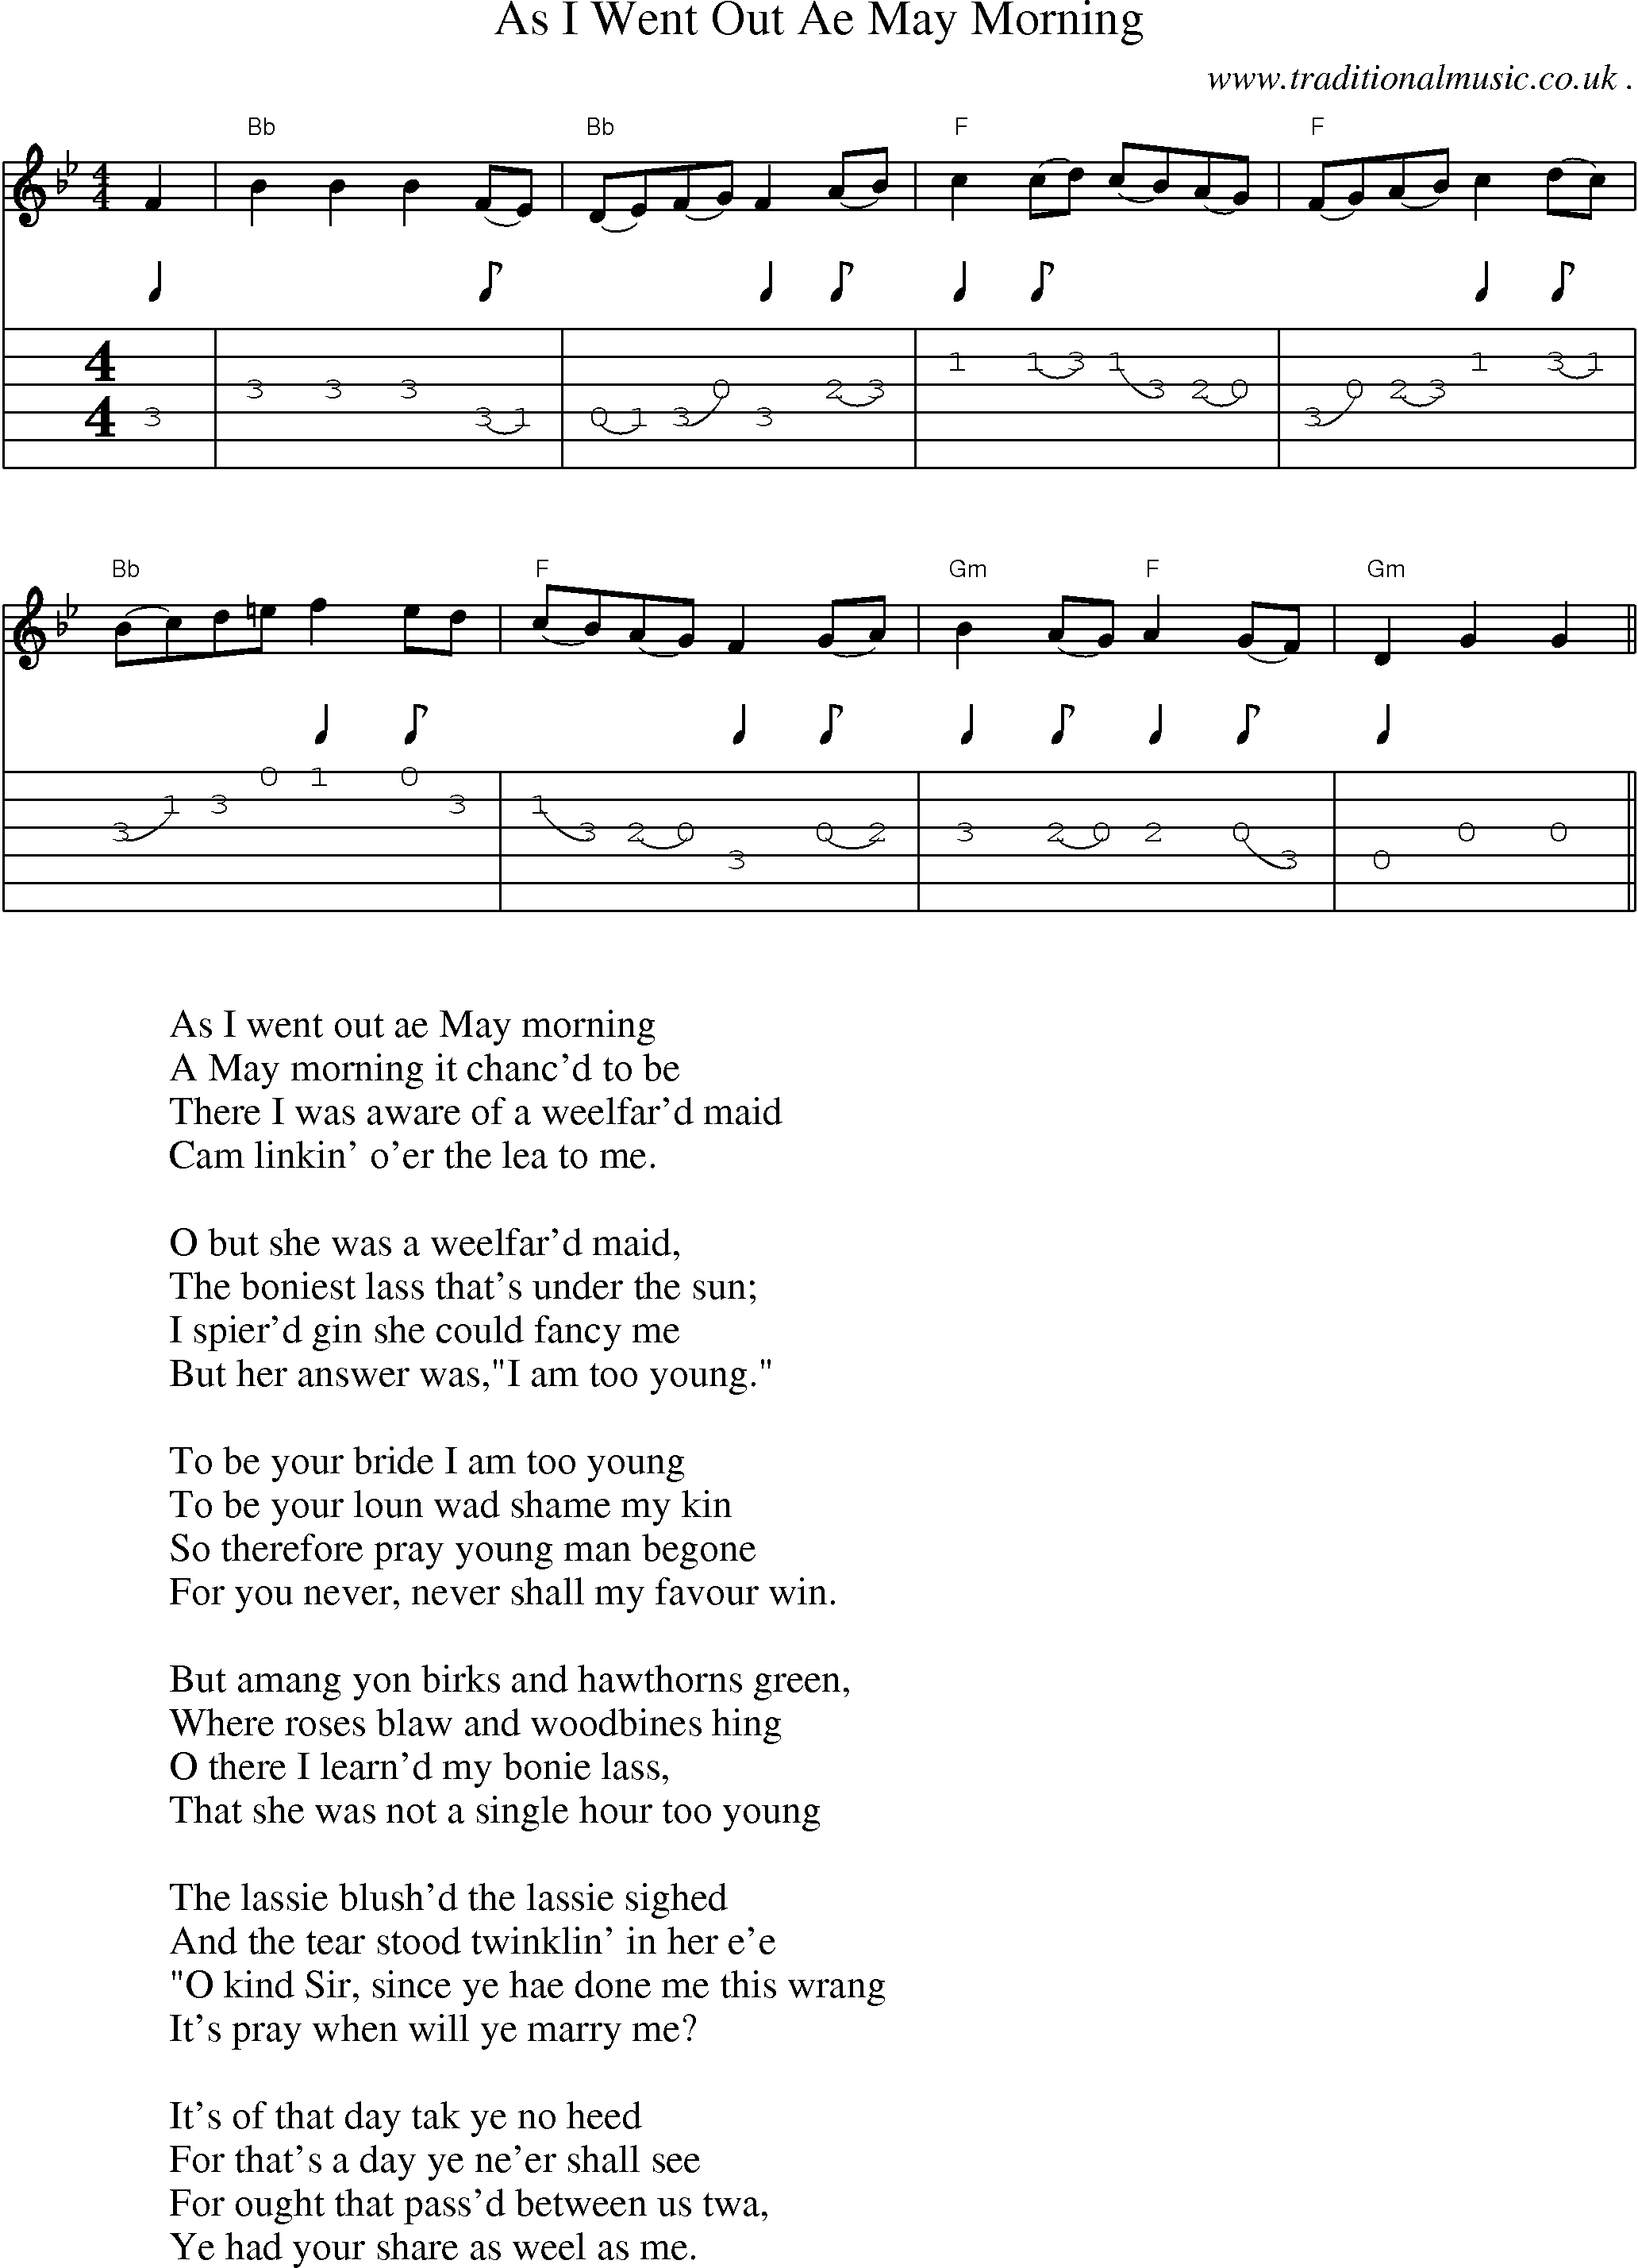 Sheet-Music and Guitar Tabs for As I Went Out Ae May Morning